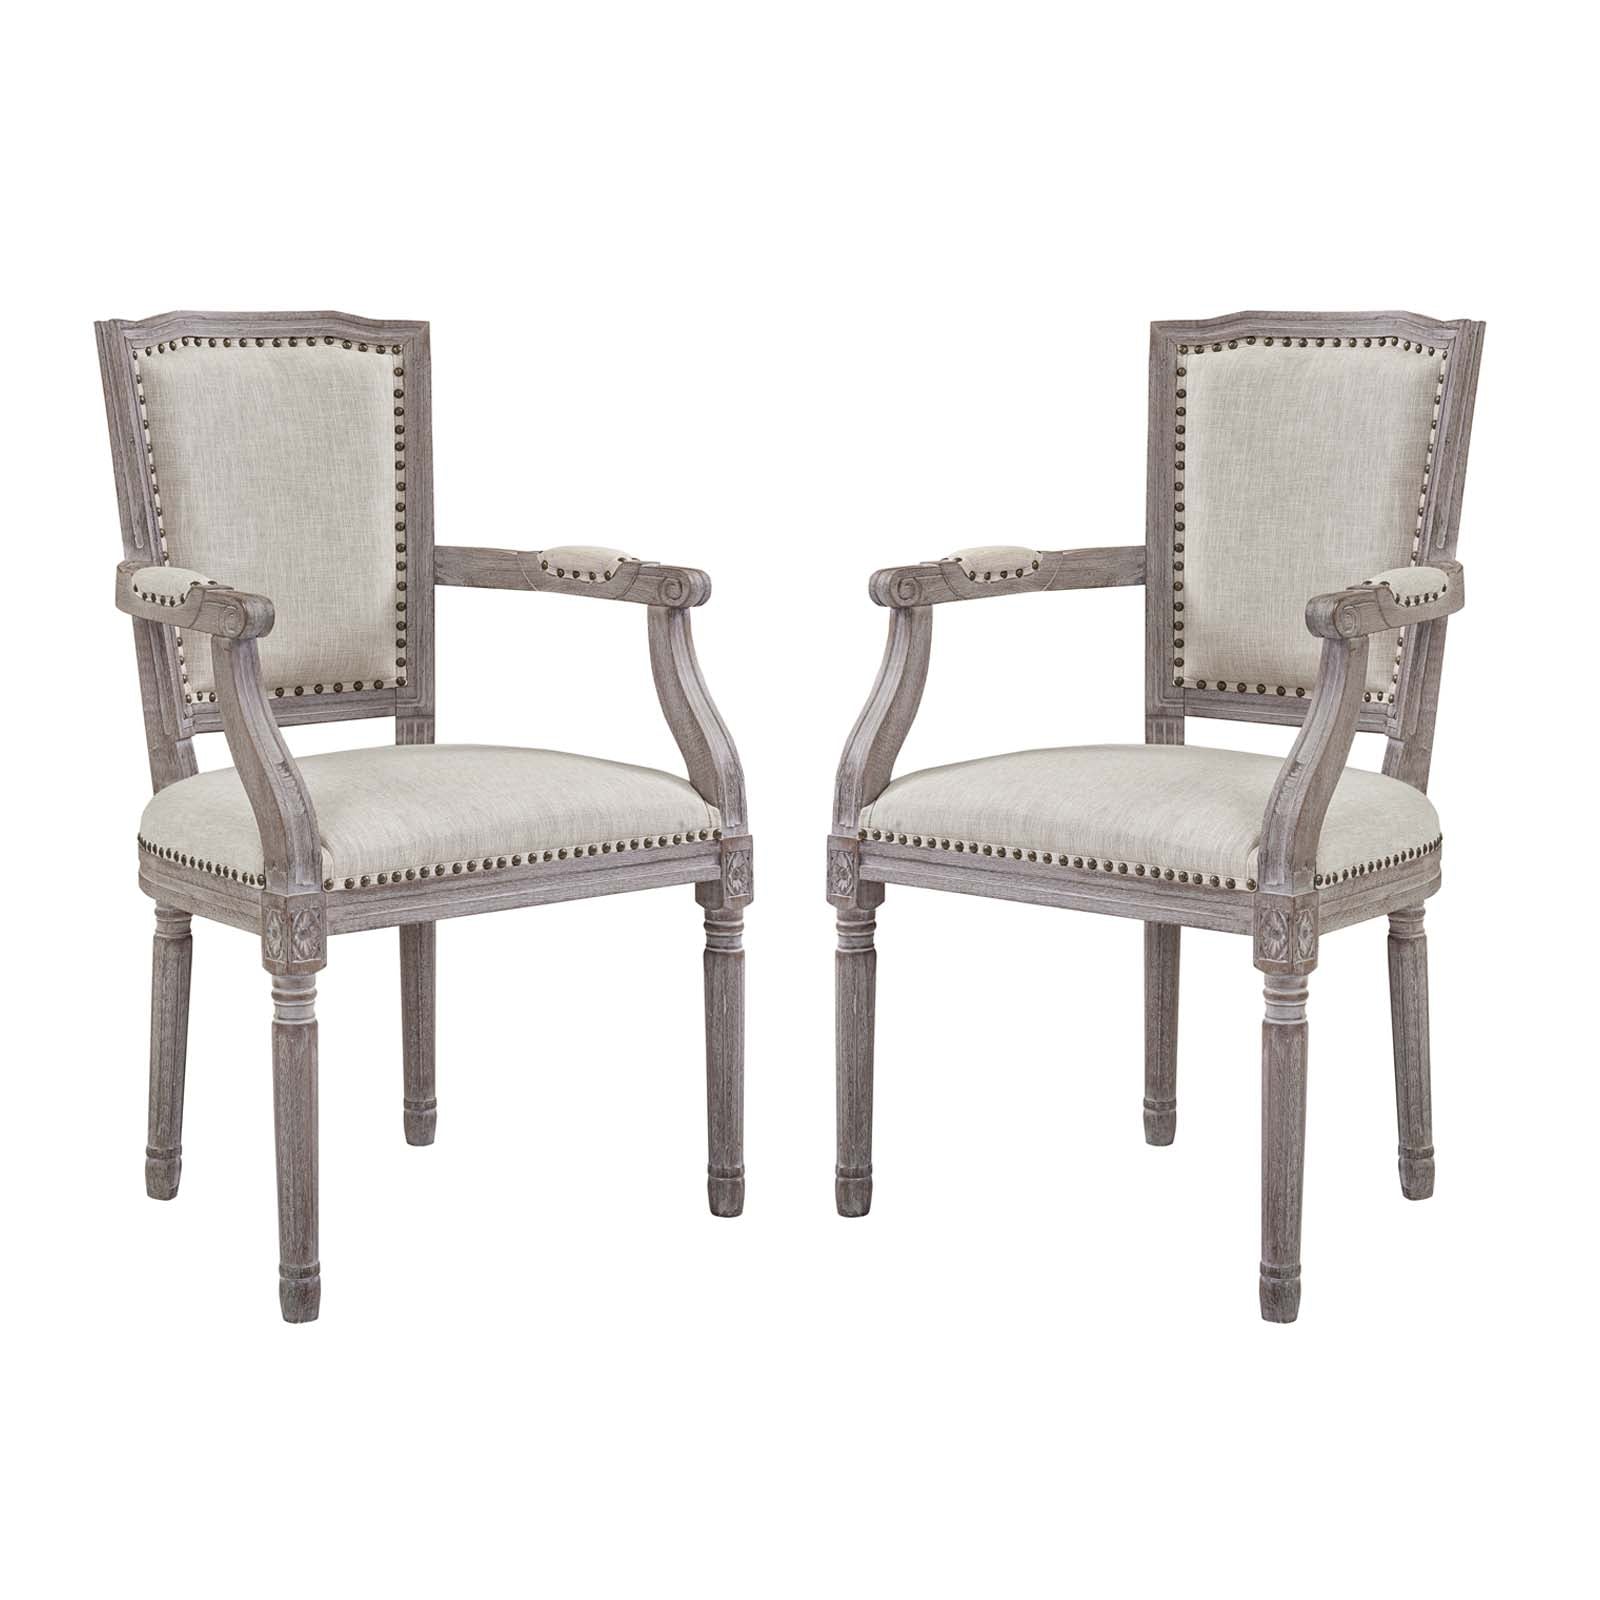 Penchant Dining Armchair Upholstered Fabric Set of 2